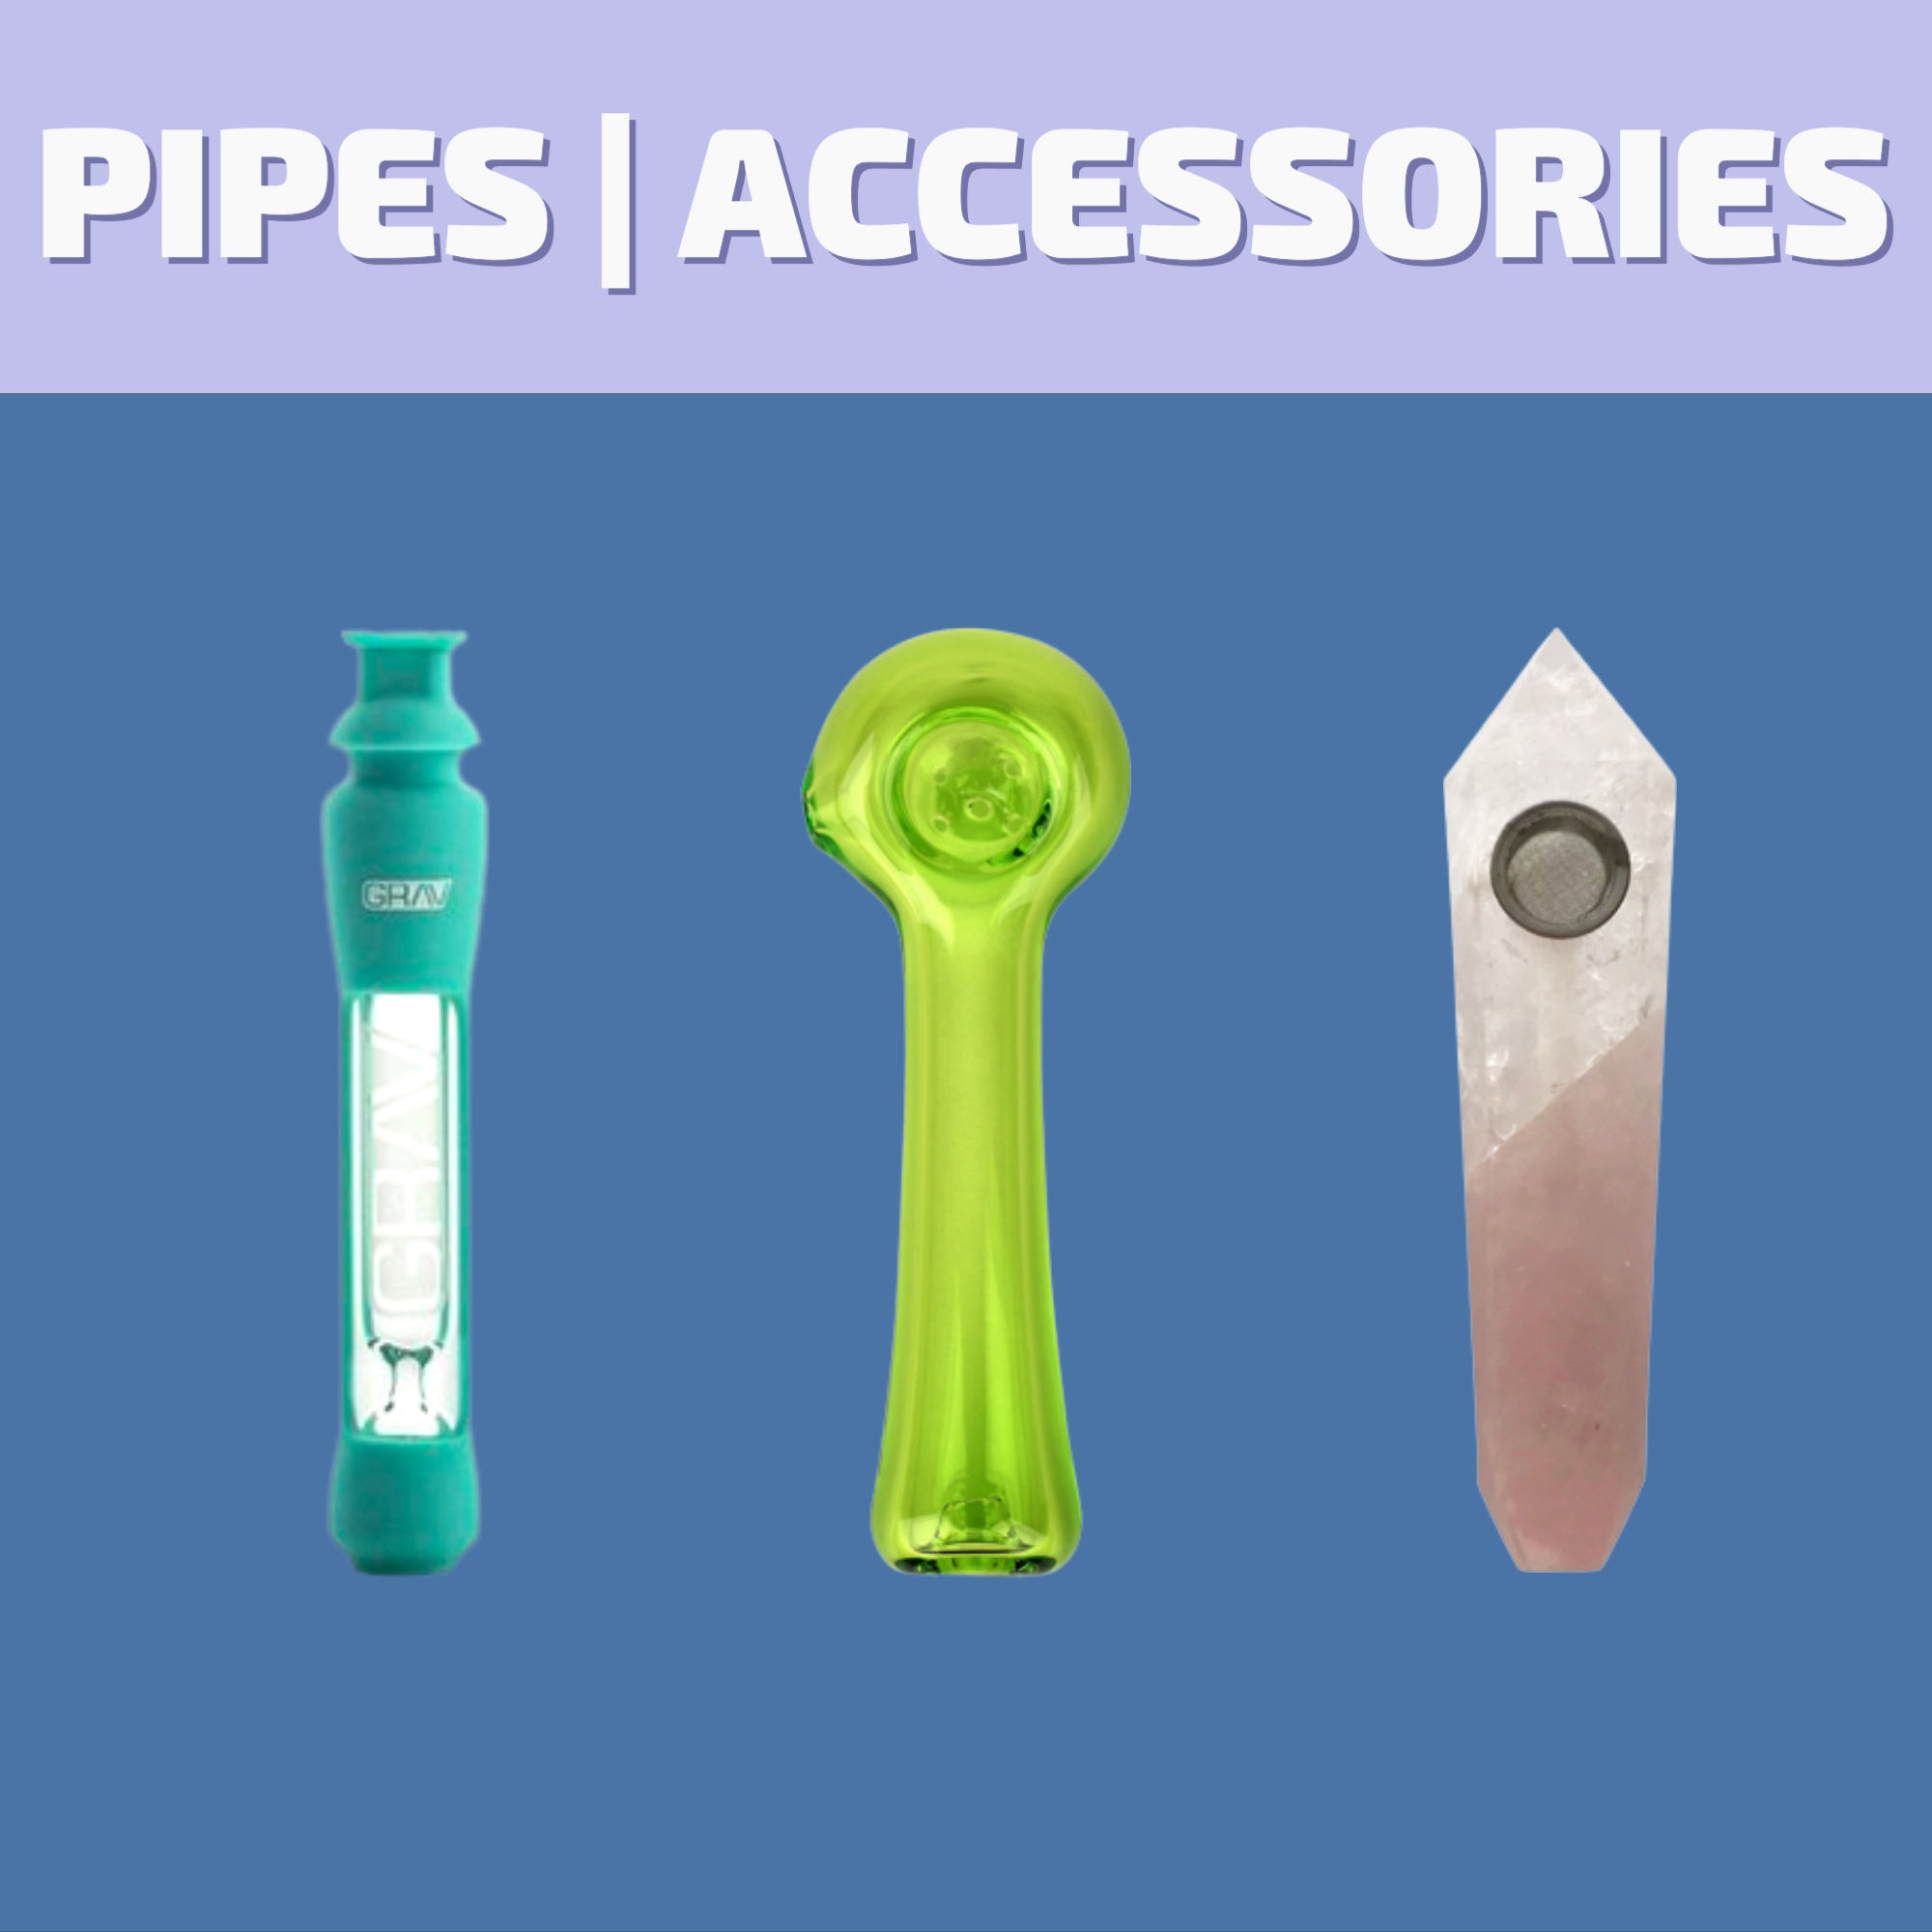 Buy Glass Pipes, Bubblers, One Hitters, and Crystal Pipes online for same day delivery in Winnipeg or visit our dispensary on 580 Academy Road. 